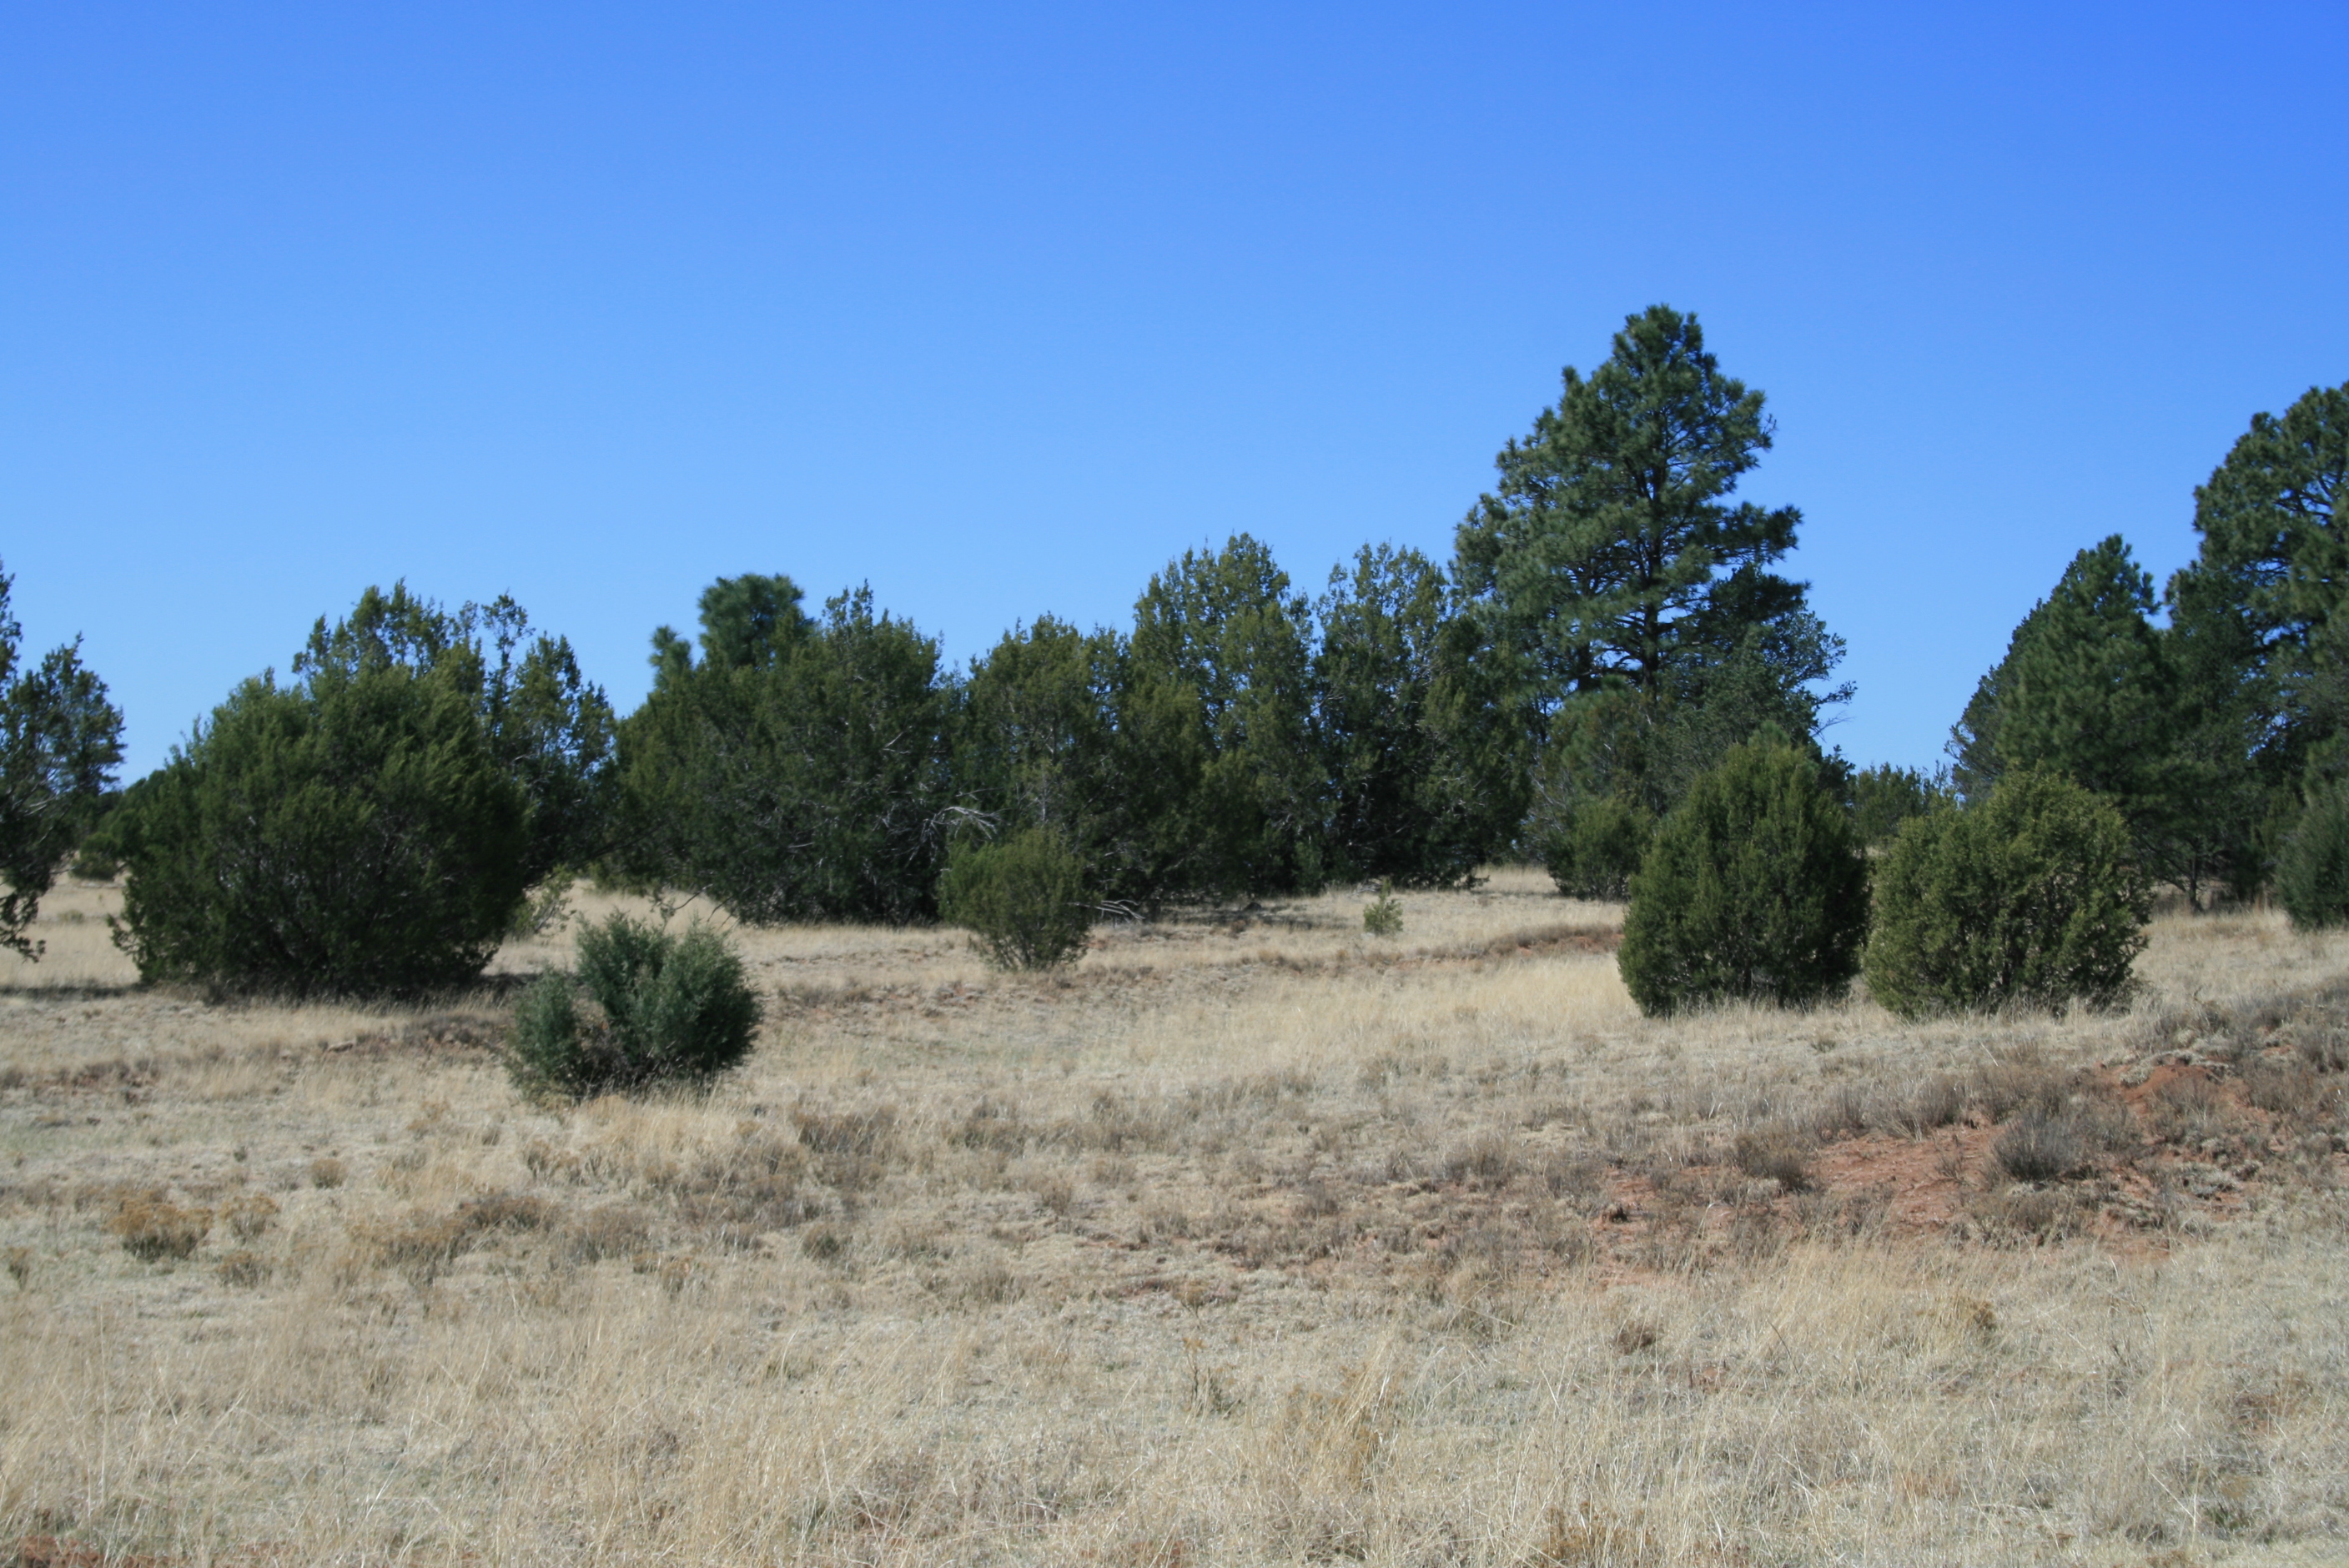 Modest ruts and swales at Tecolote Ranch in San Miguel County, New Mexico